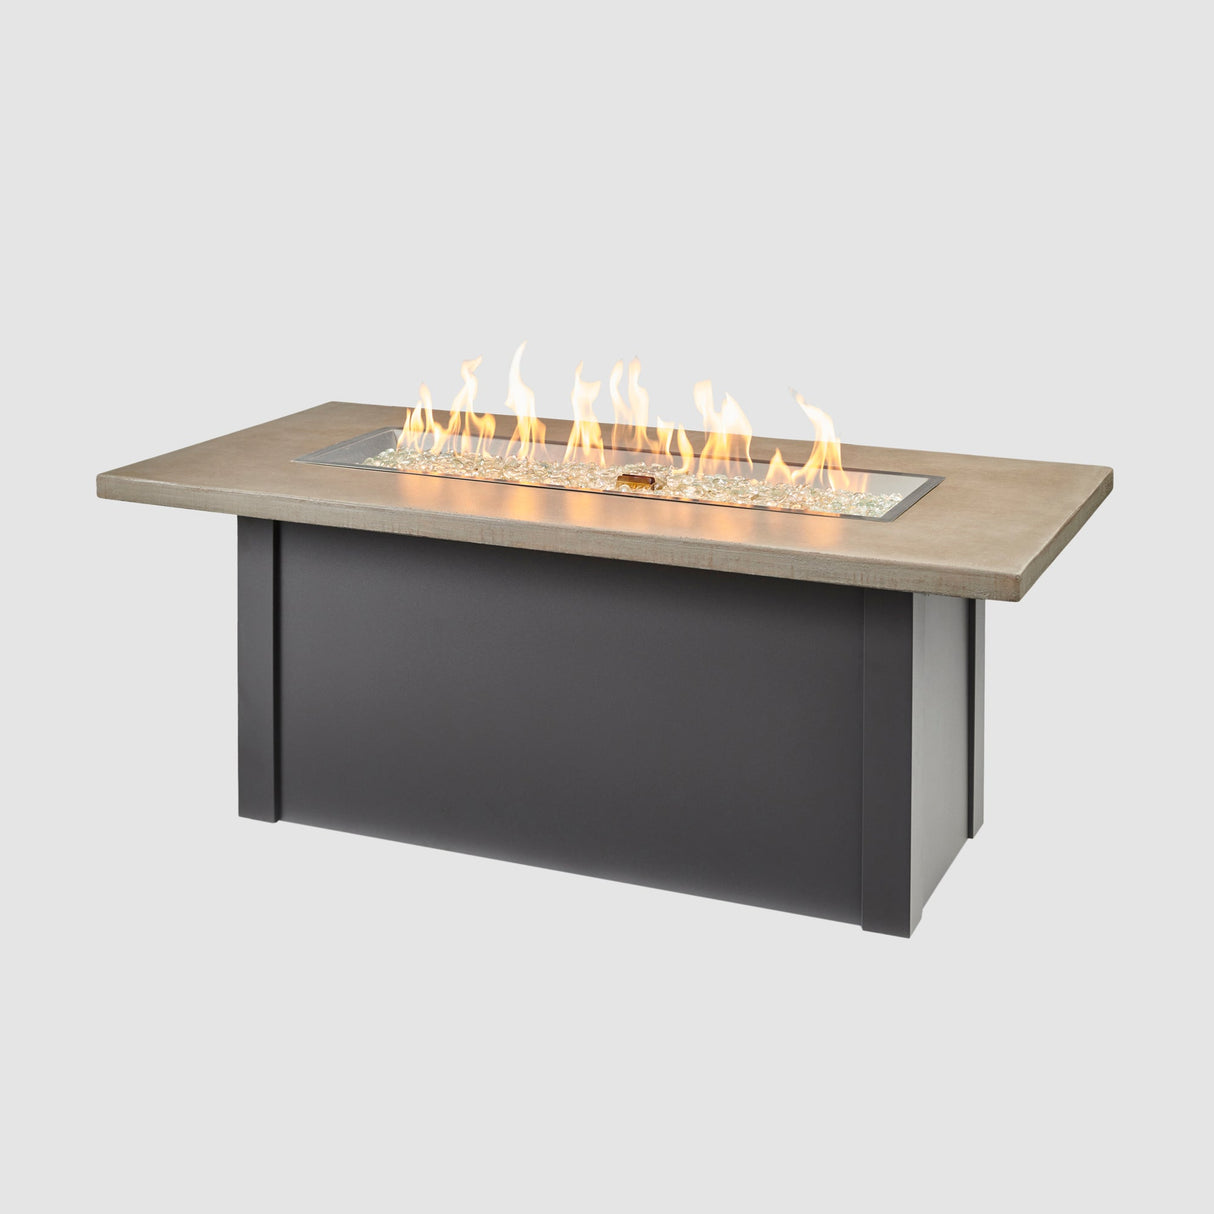 Havenwood Linear Gas Fire Pit Table with a Pebble Grey top and Graphite Grey base on a grey background